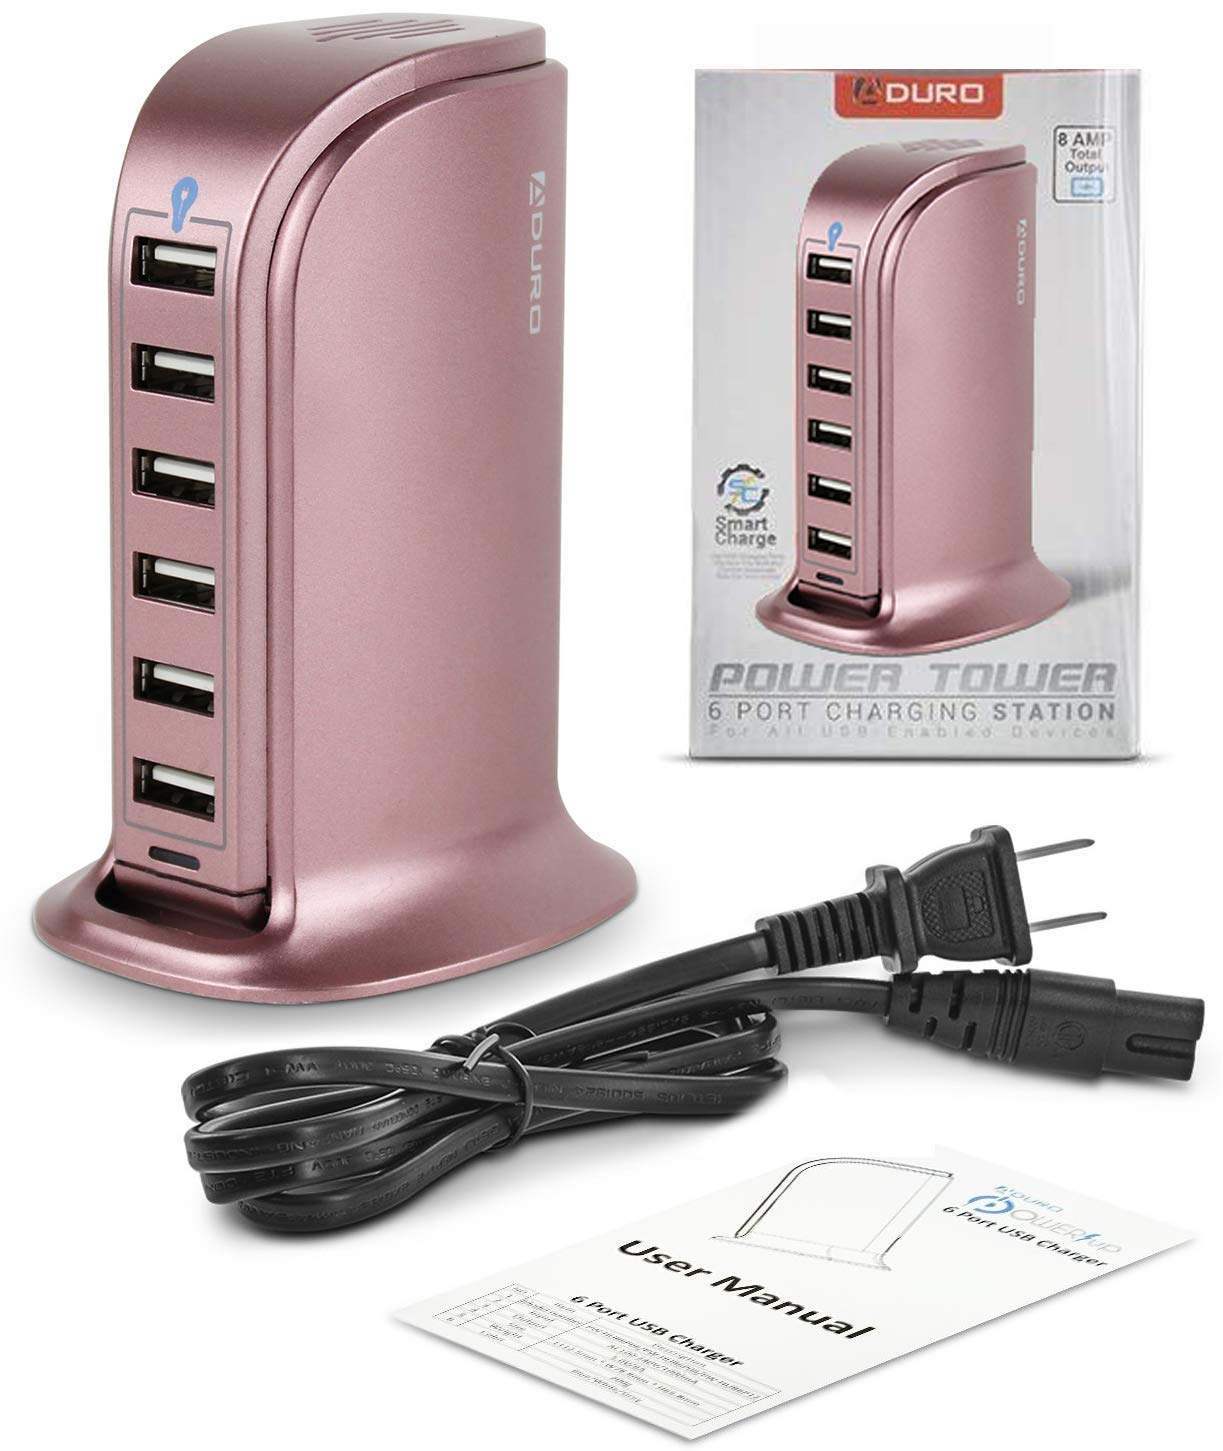 Aduro 40W 6-Port USB Desktop Charging Station Hub Wall Charger for iPhone iPad Tablets Smartphones with Smart Flow (Rose Gold)